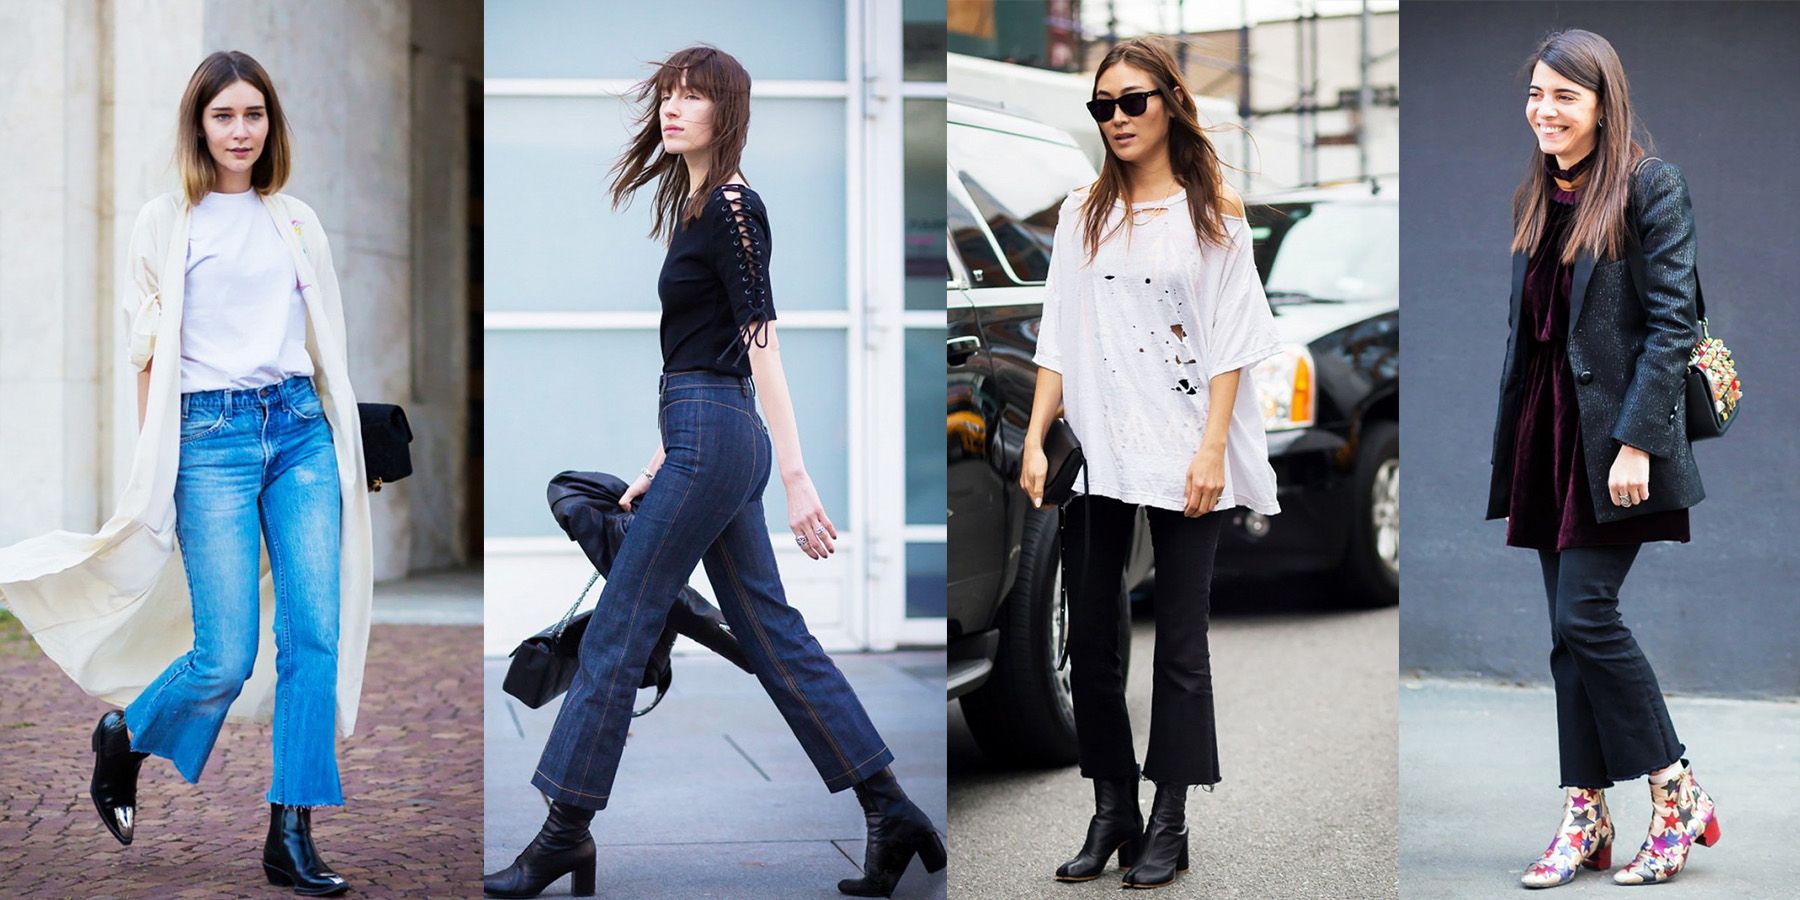 Check out 7 Secrets of Success to Look Cool Wearing Cropped Flare Pants